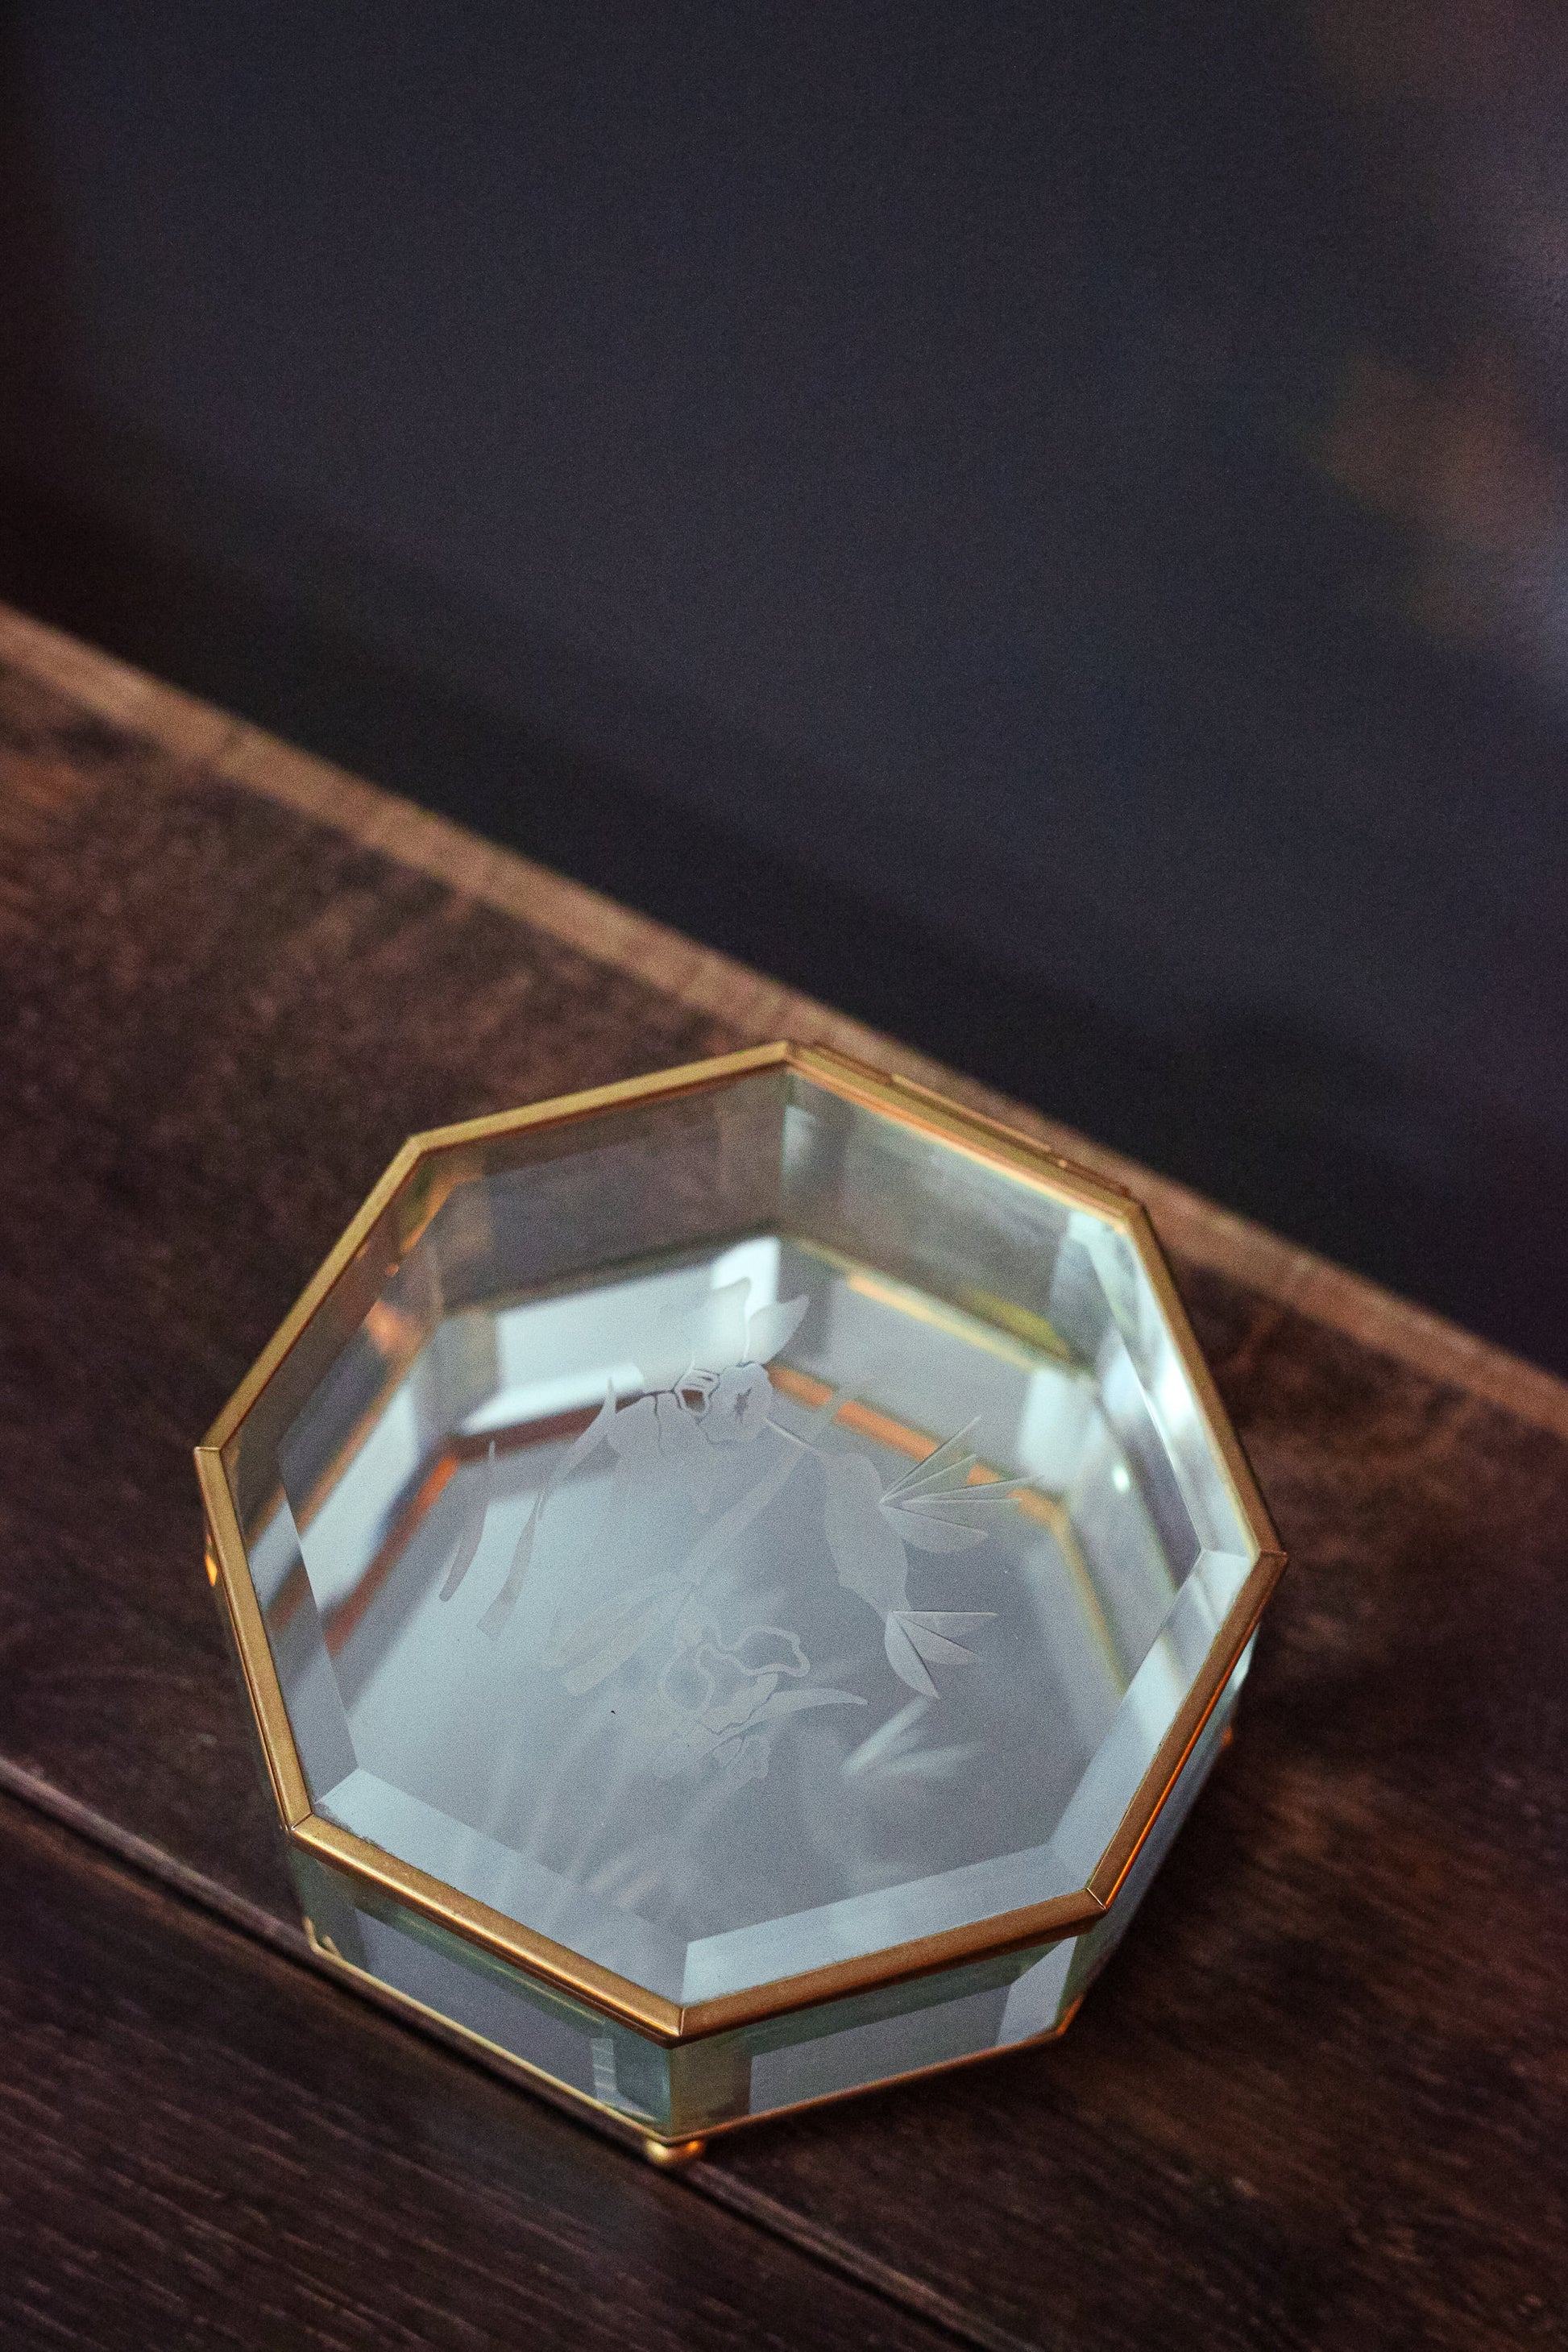 Etched Glass & Brass Octagon Mirrored Jewelry Box with Hummingbird Design - Octagonal Beveled Glass Jewelry Box with Mirror